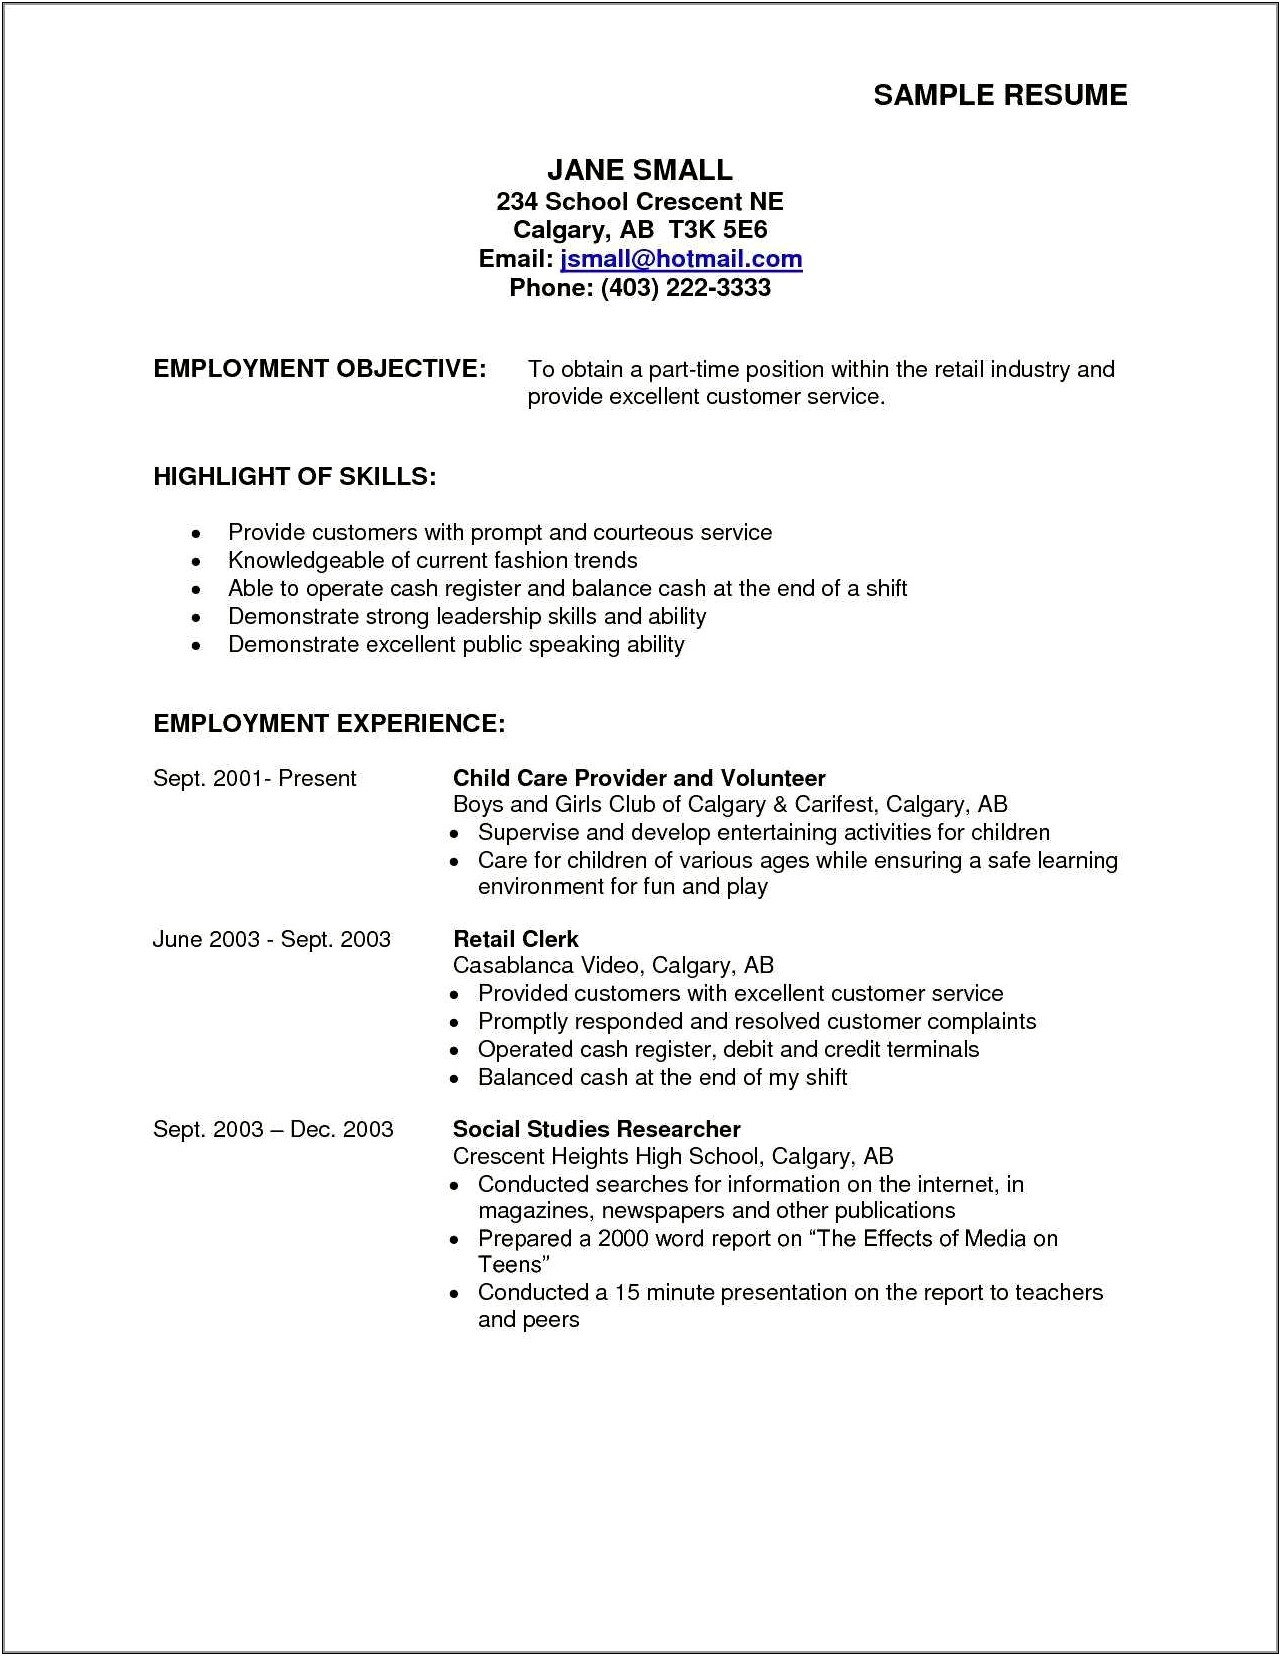 Sample Resume With Full And Part Time Experience